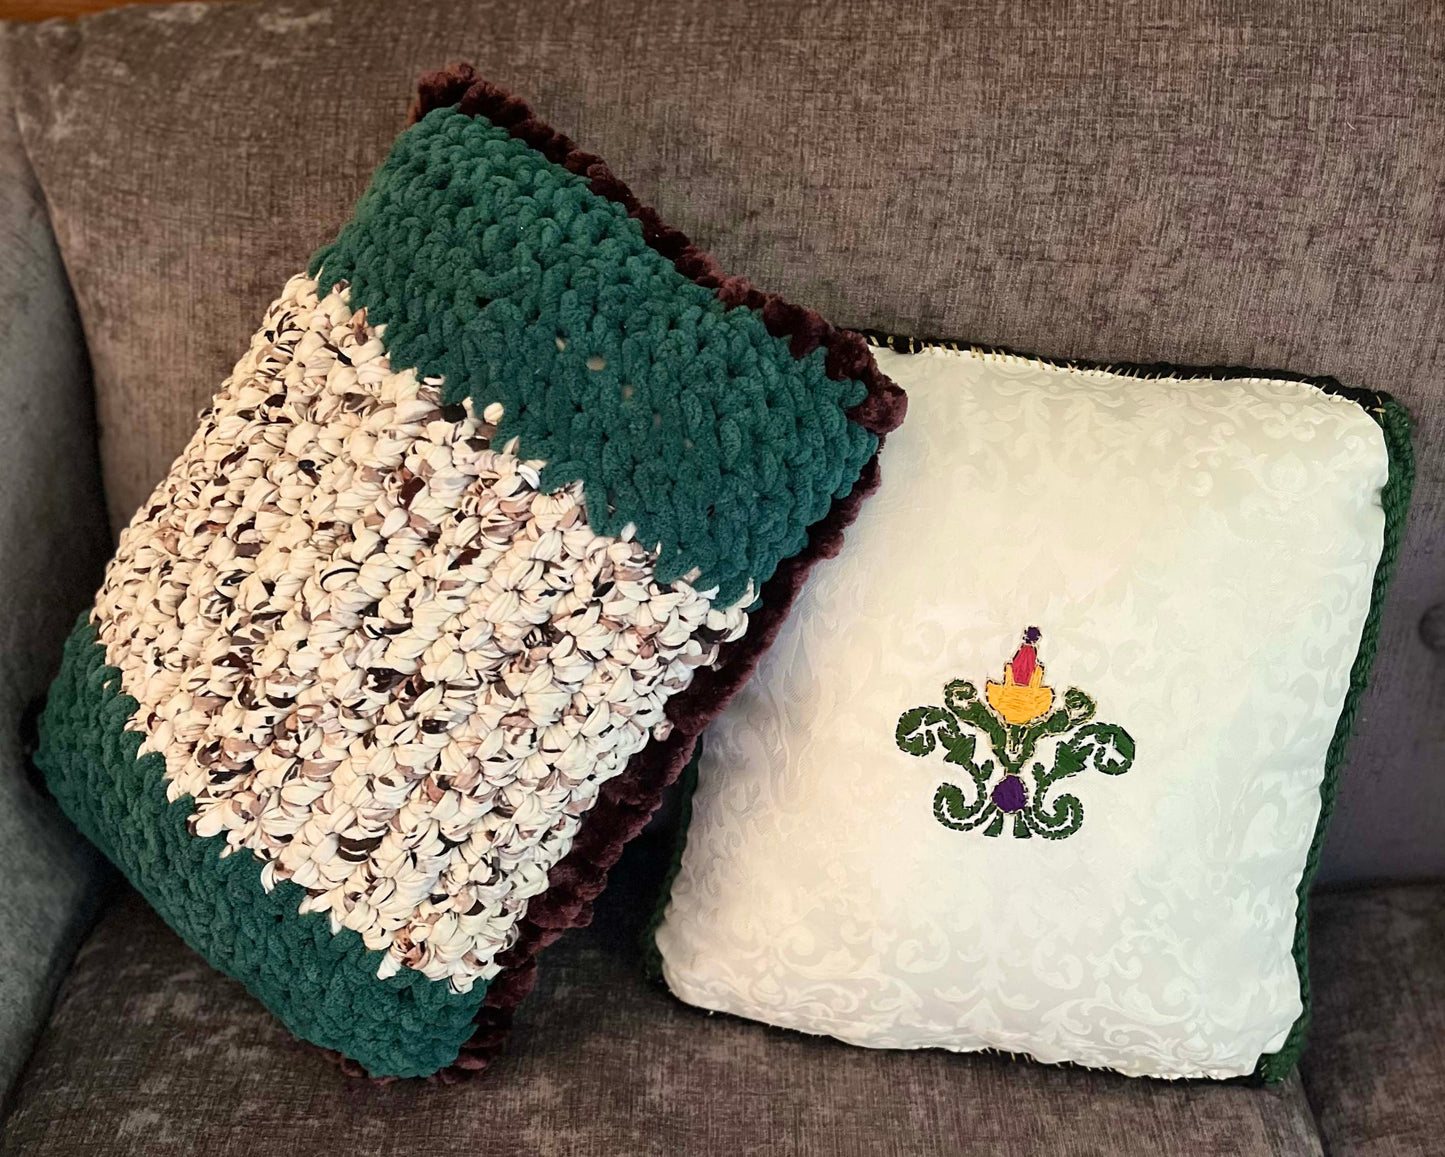 "Choose Your Own Adventure!" Handmade Upcycled Fabric Crochet and Embroidery Decorative Statement Throw Pillow